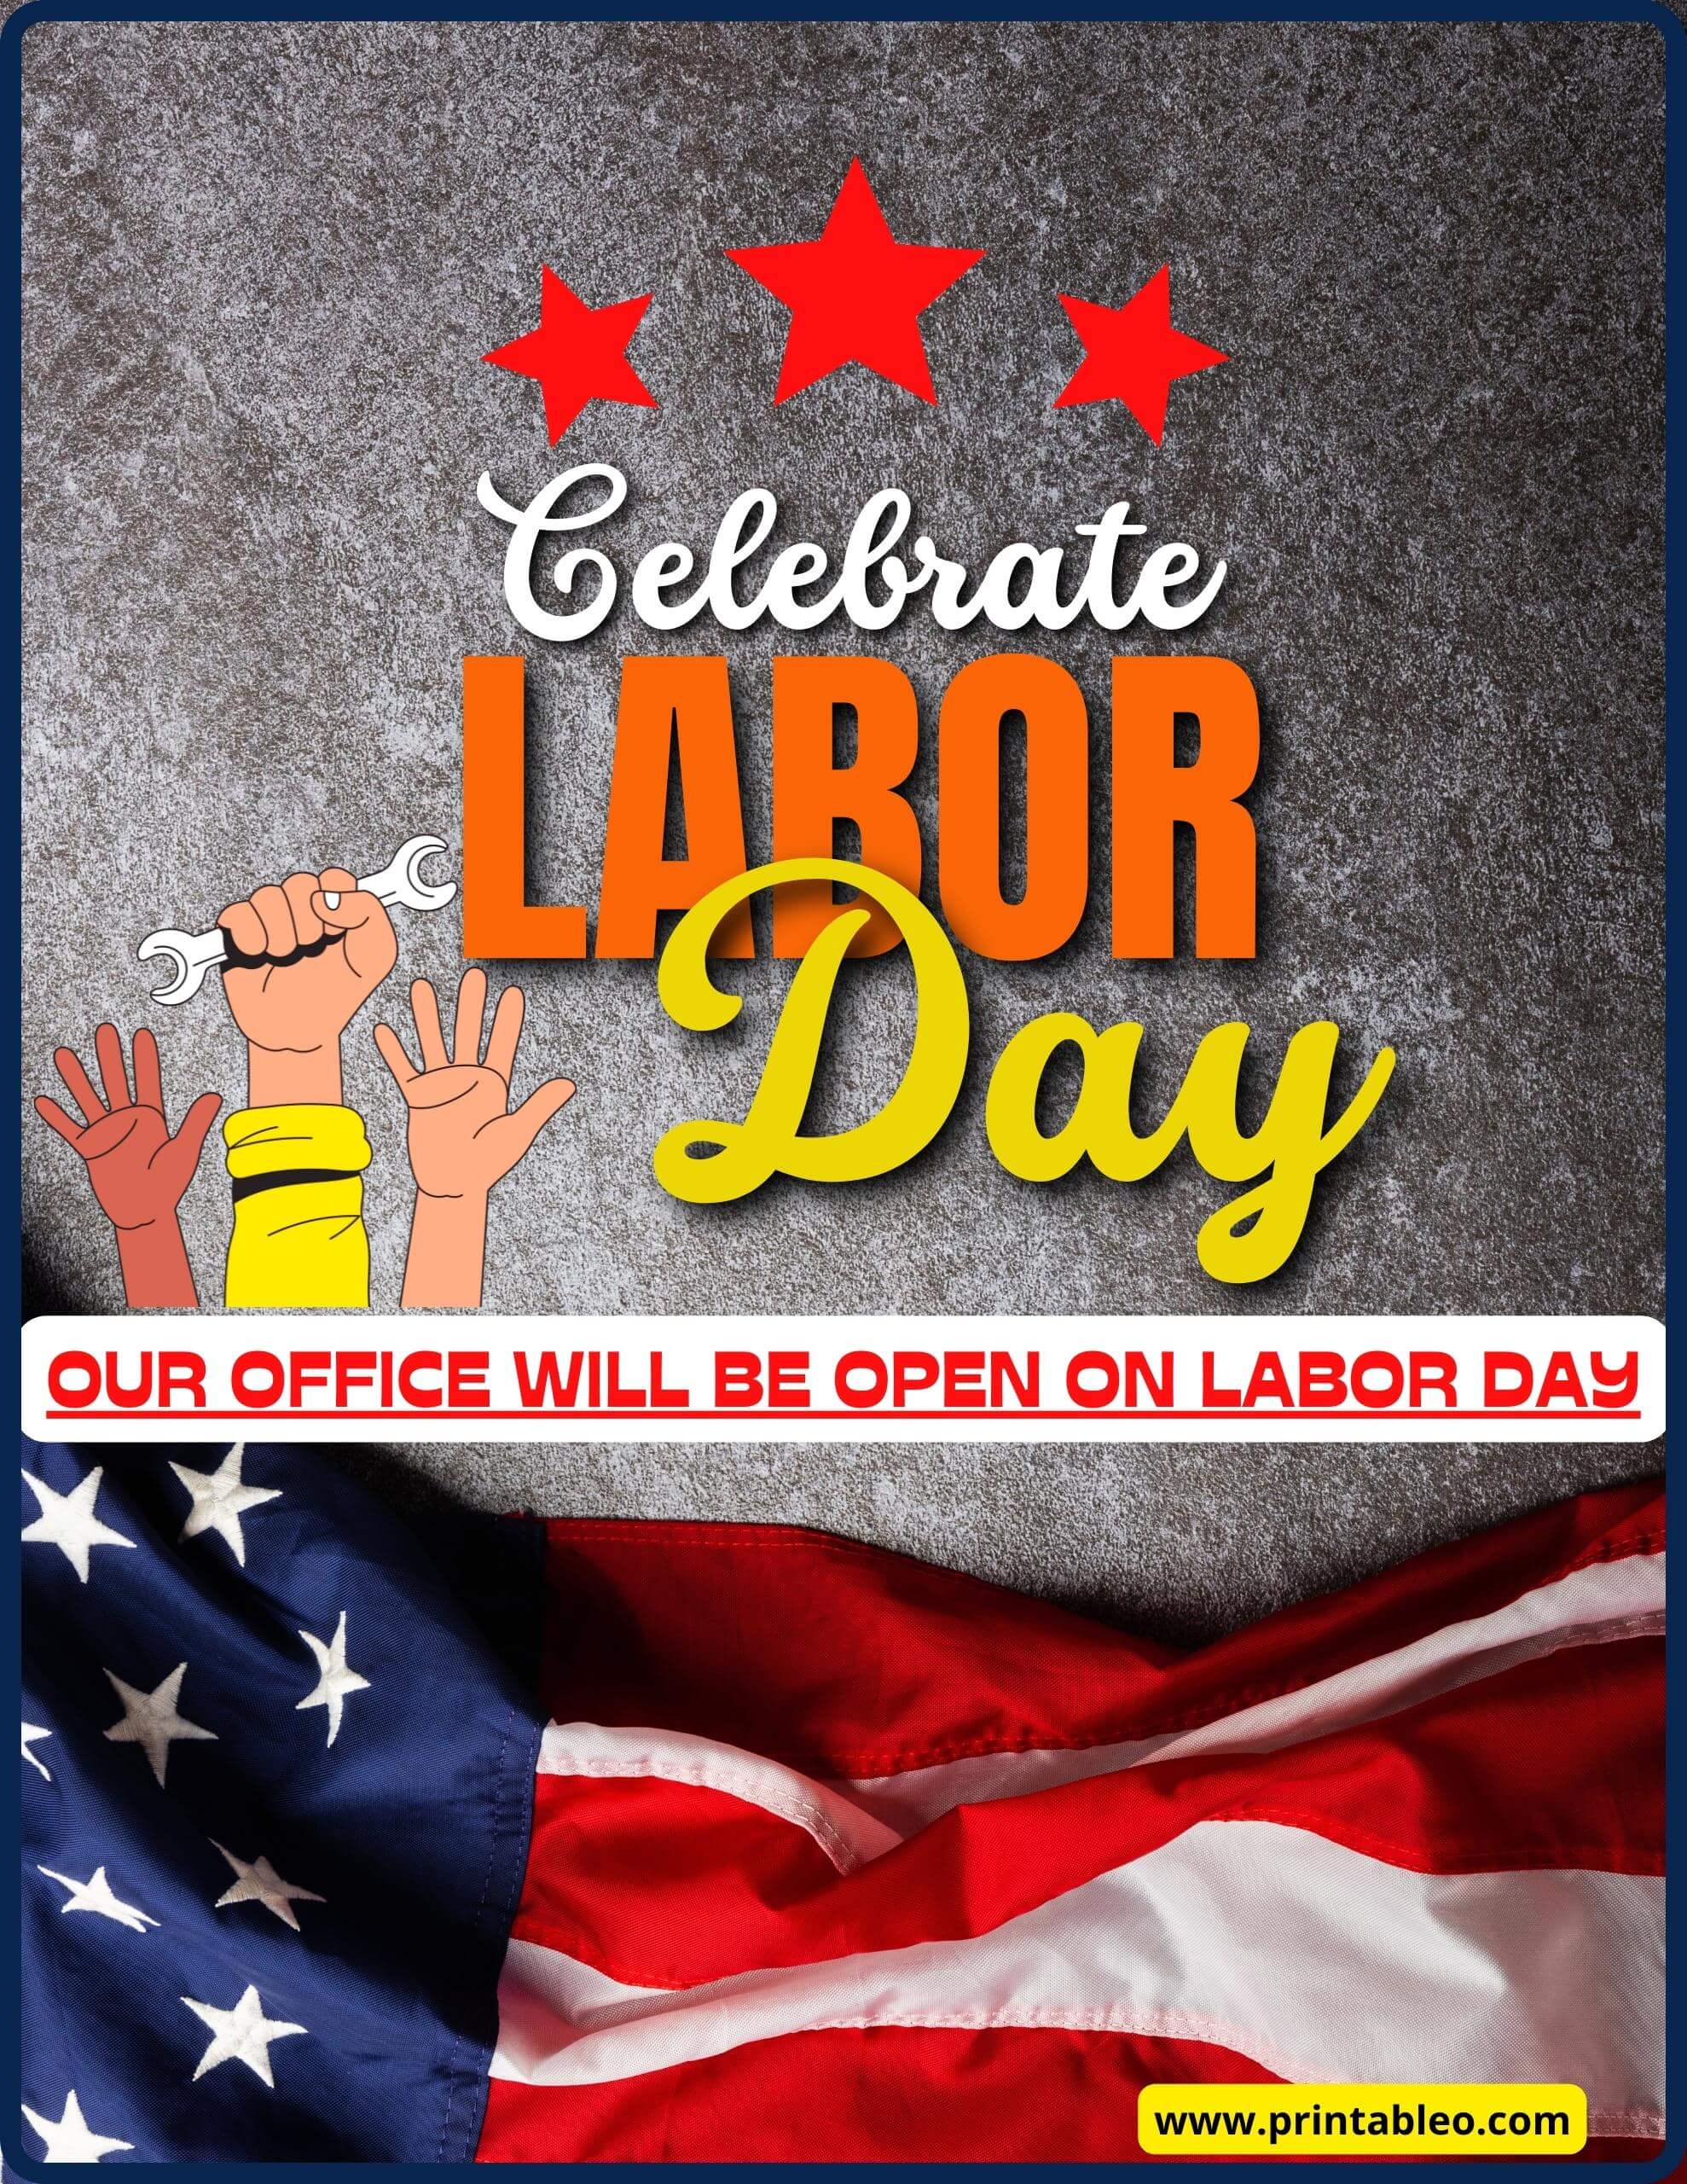 20+Printable Labor Day Signs Open, Closed, Celebration Sign